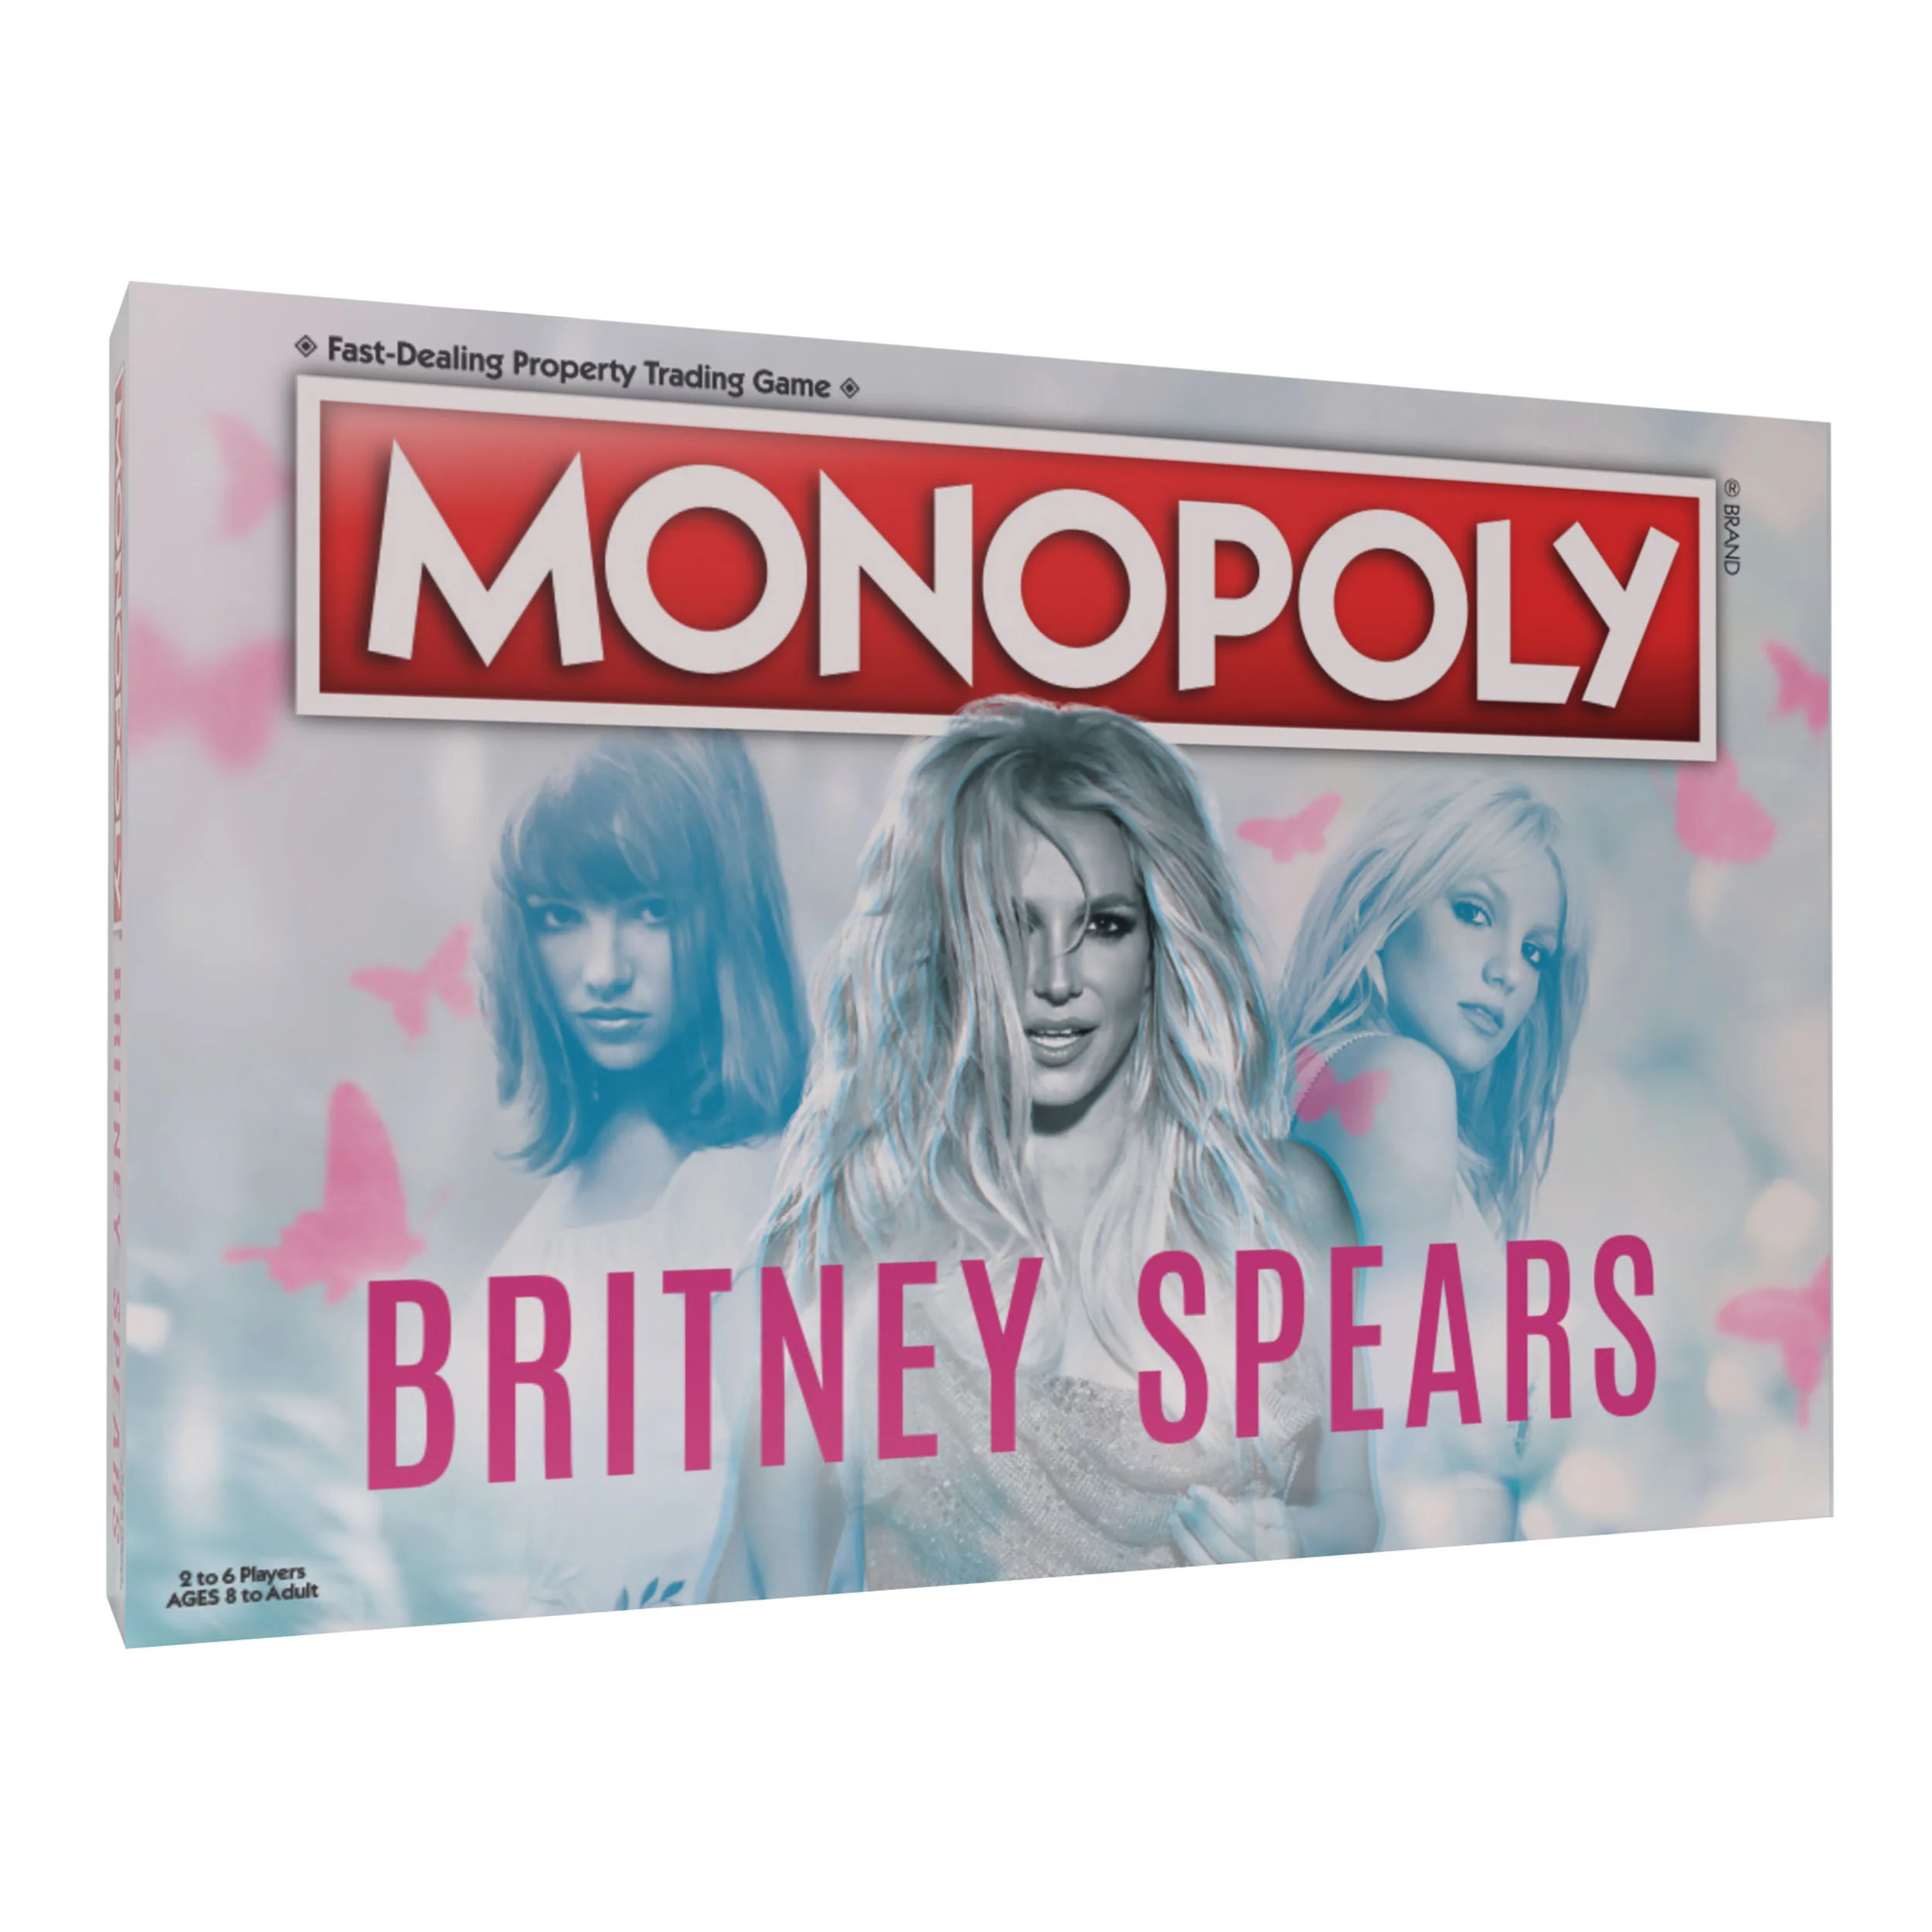 Britney Spears Monopoly game